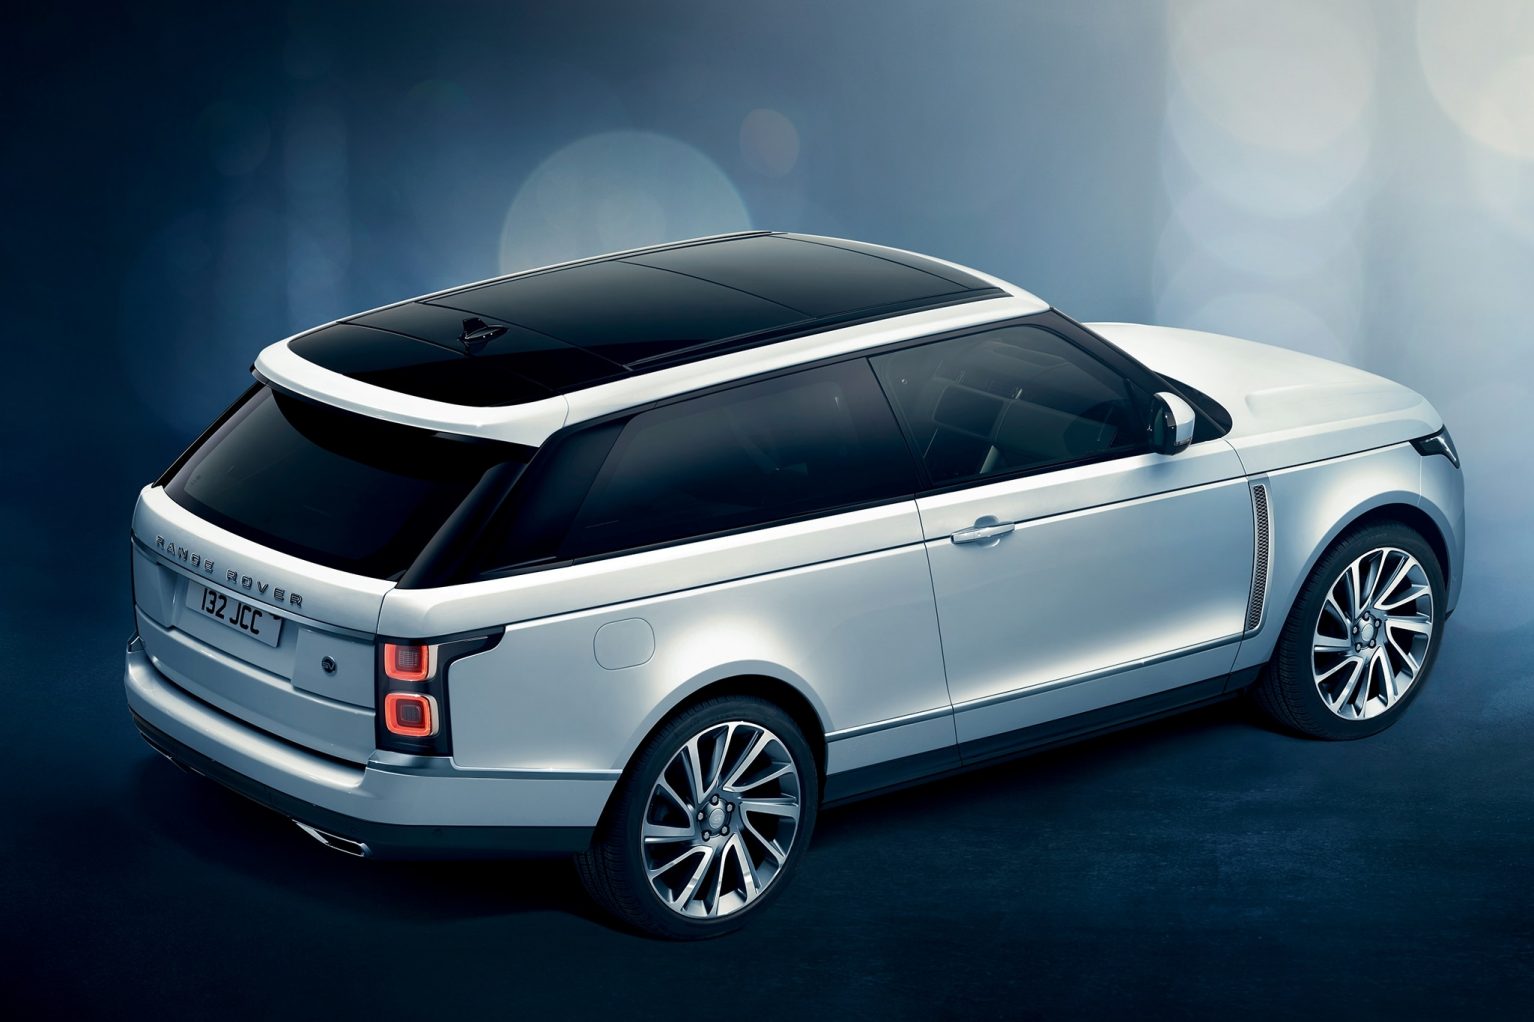 Range Rover Sv Coupe New Design HD Wallpaper Autoweik